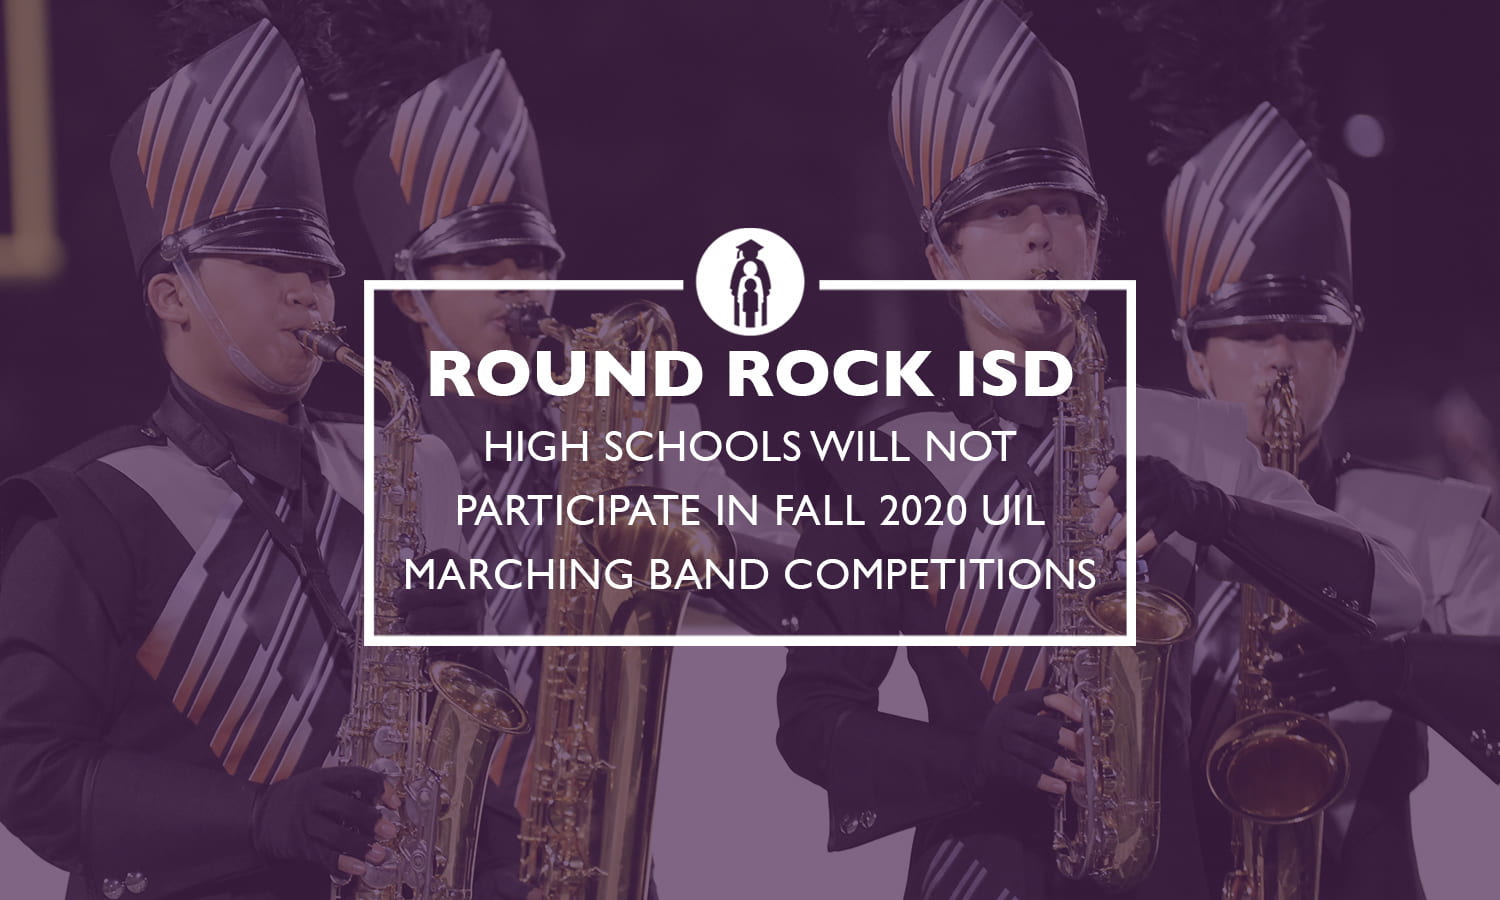 Round Rock ISD high schools will not participate in Fall 2020 UIL